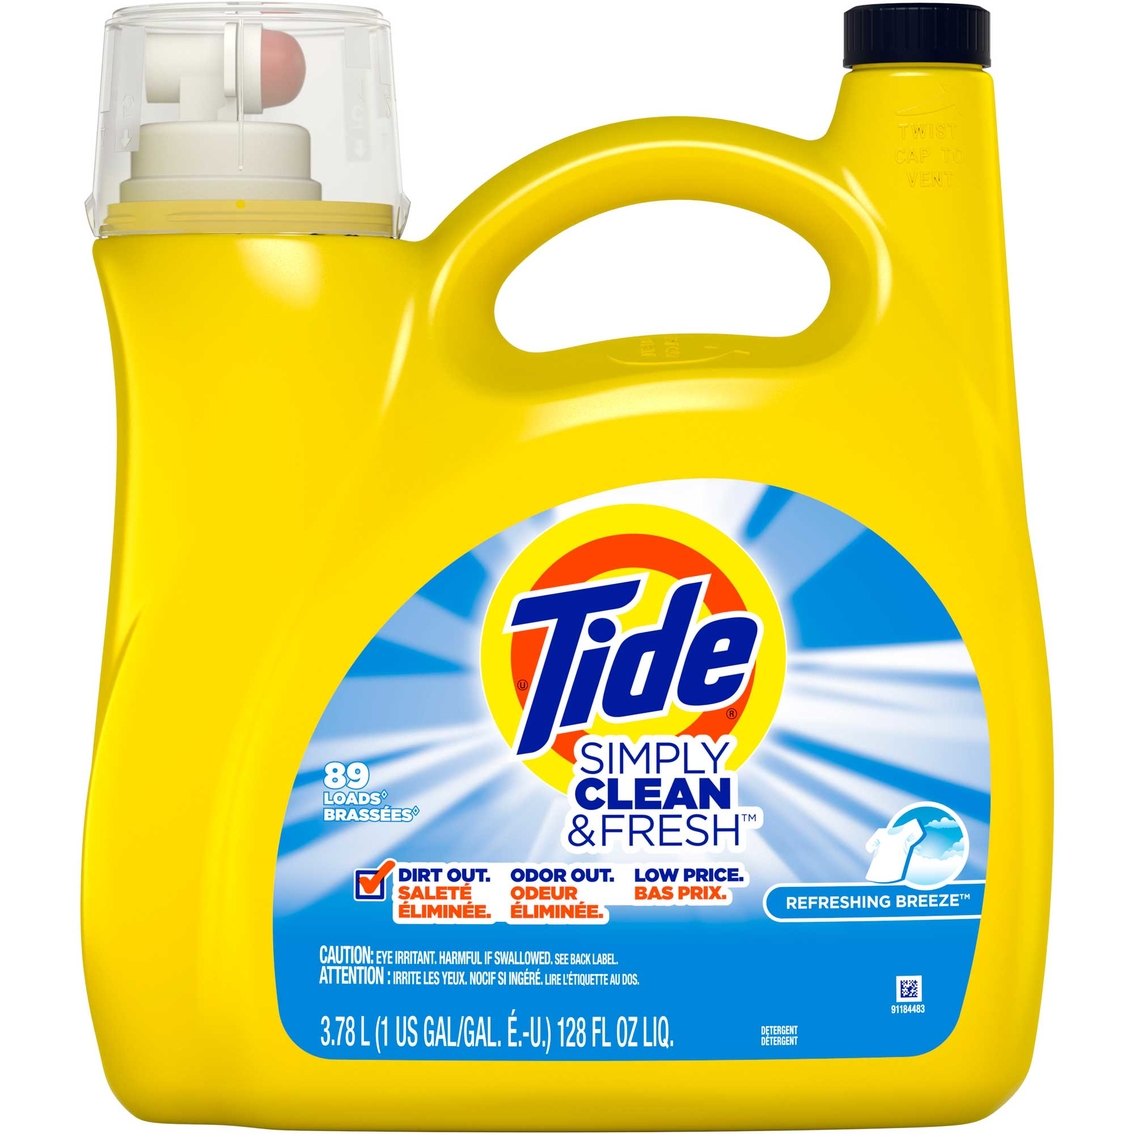 Tide Simply Clean and Fresh Liquid Laundry Detergent, Refreshing Breeze